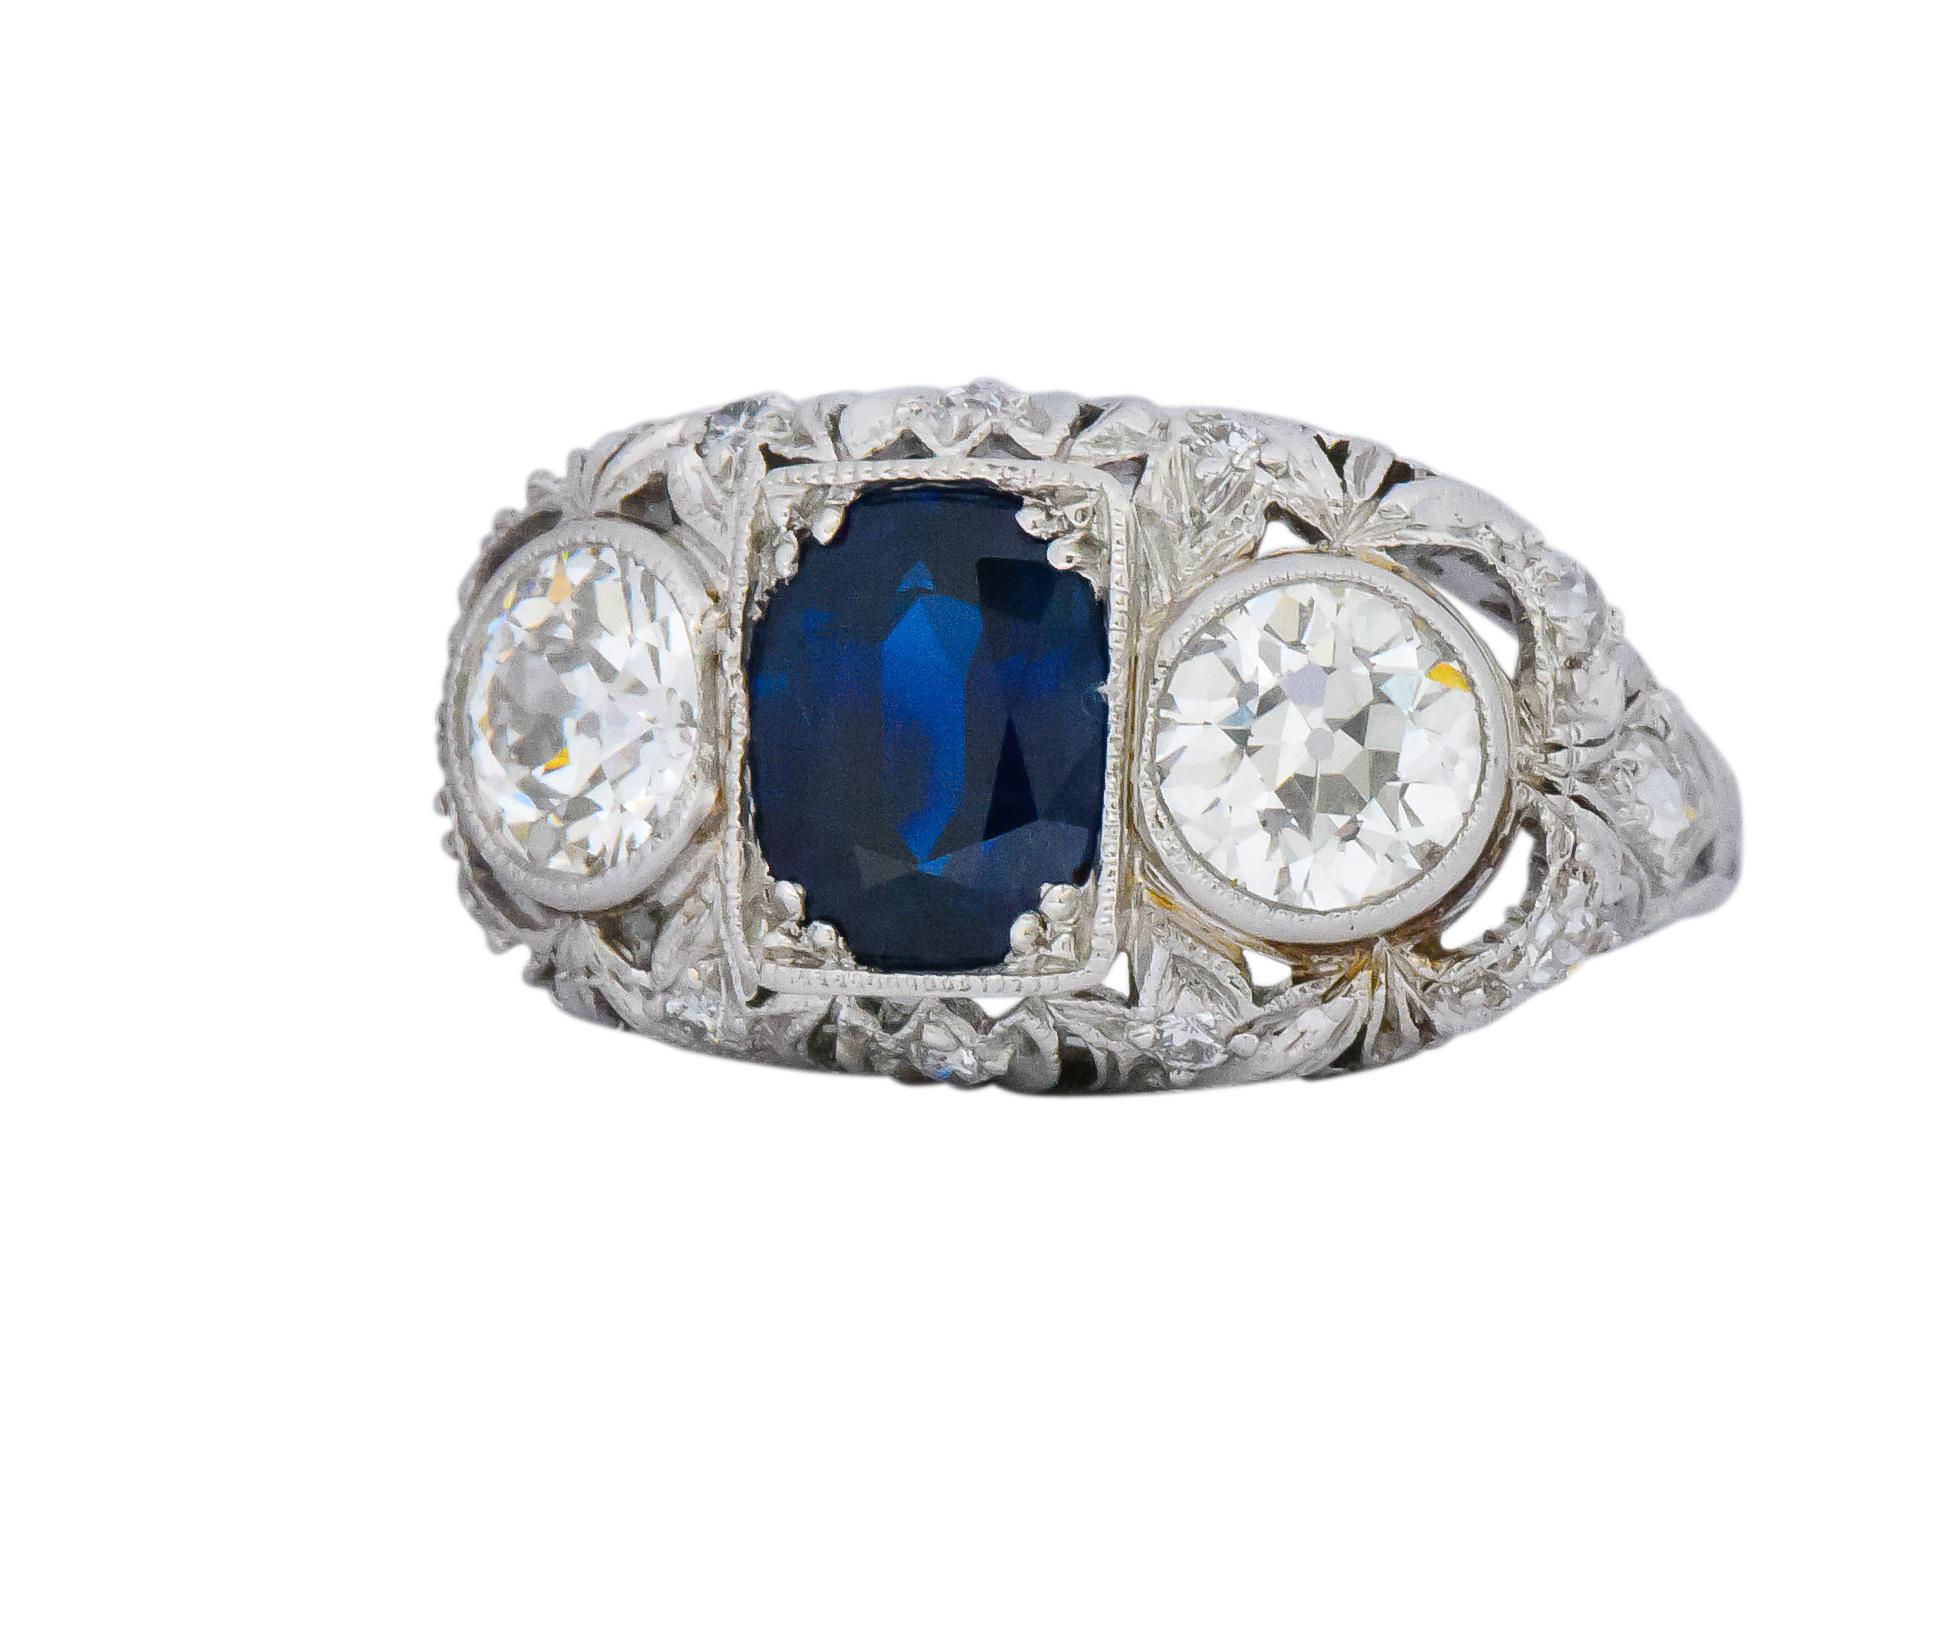 Centering an oval mixed cut sapphire weighing approximately 2.00 carats, bright deep blue, with no indications of heat treatment

Flanked by 2 old European cut diamonds weighing approximately 1.40 carats, H/I color and VS clarity

Accented with old